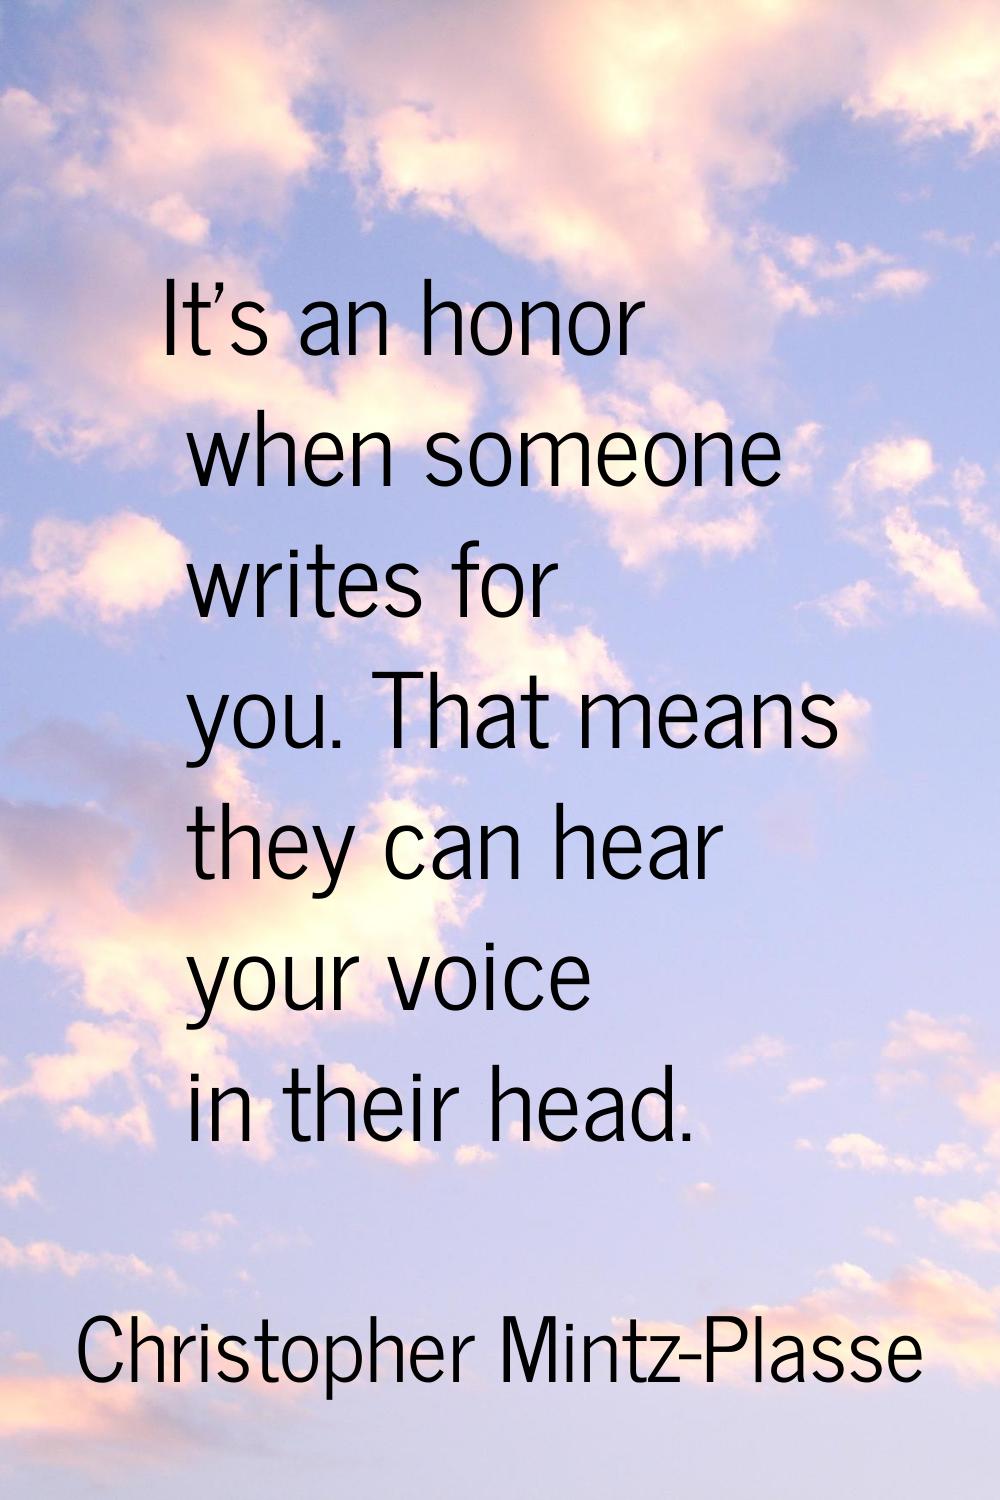 It's an honor when someone writes for you. That means they can hear your voice in their head.